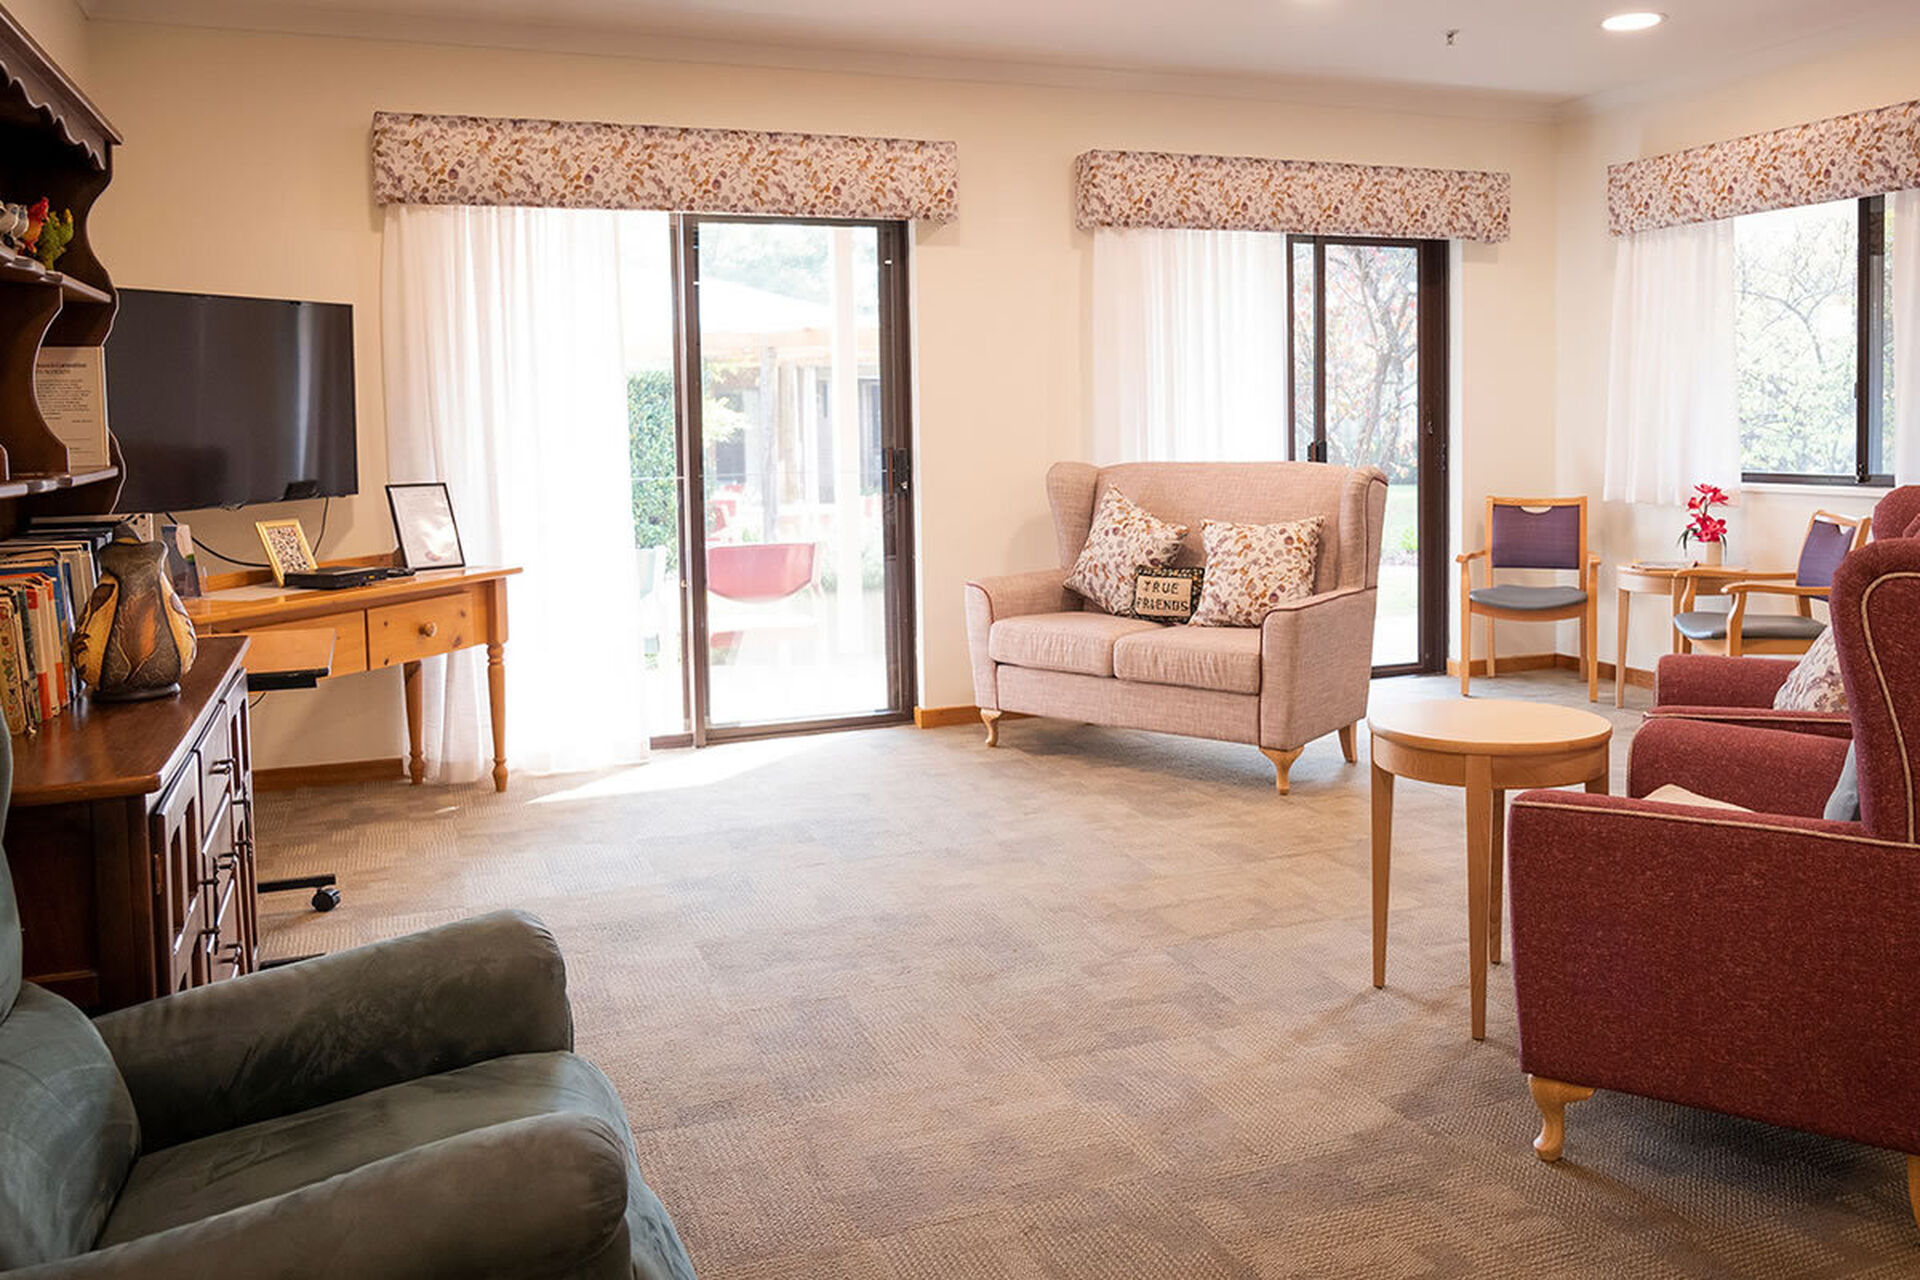 spacious sitting area for nursing home residents at baptistcare yallambee aged care home in mundaring wa